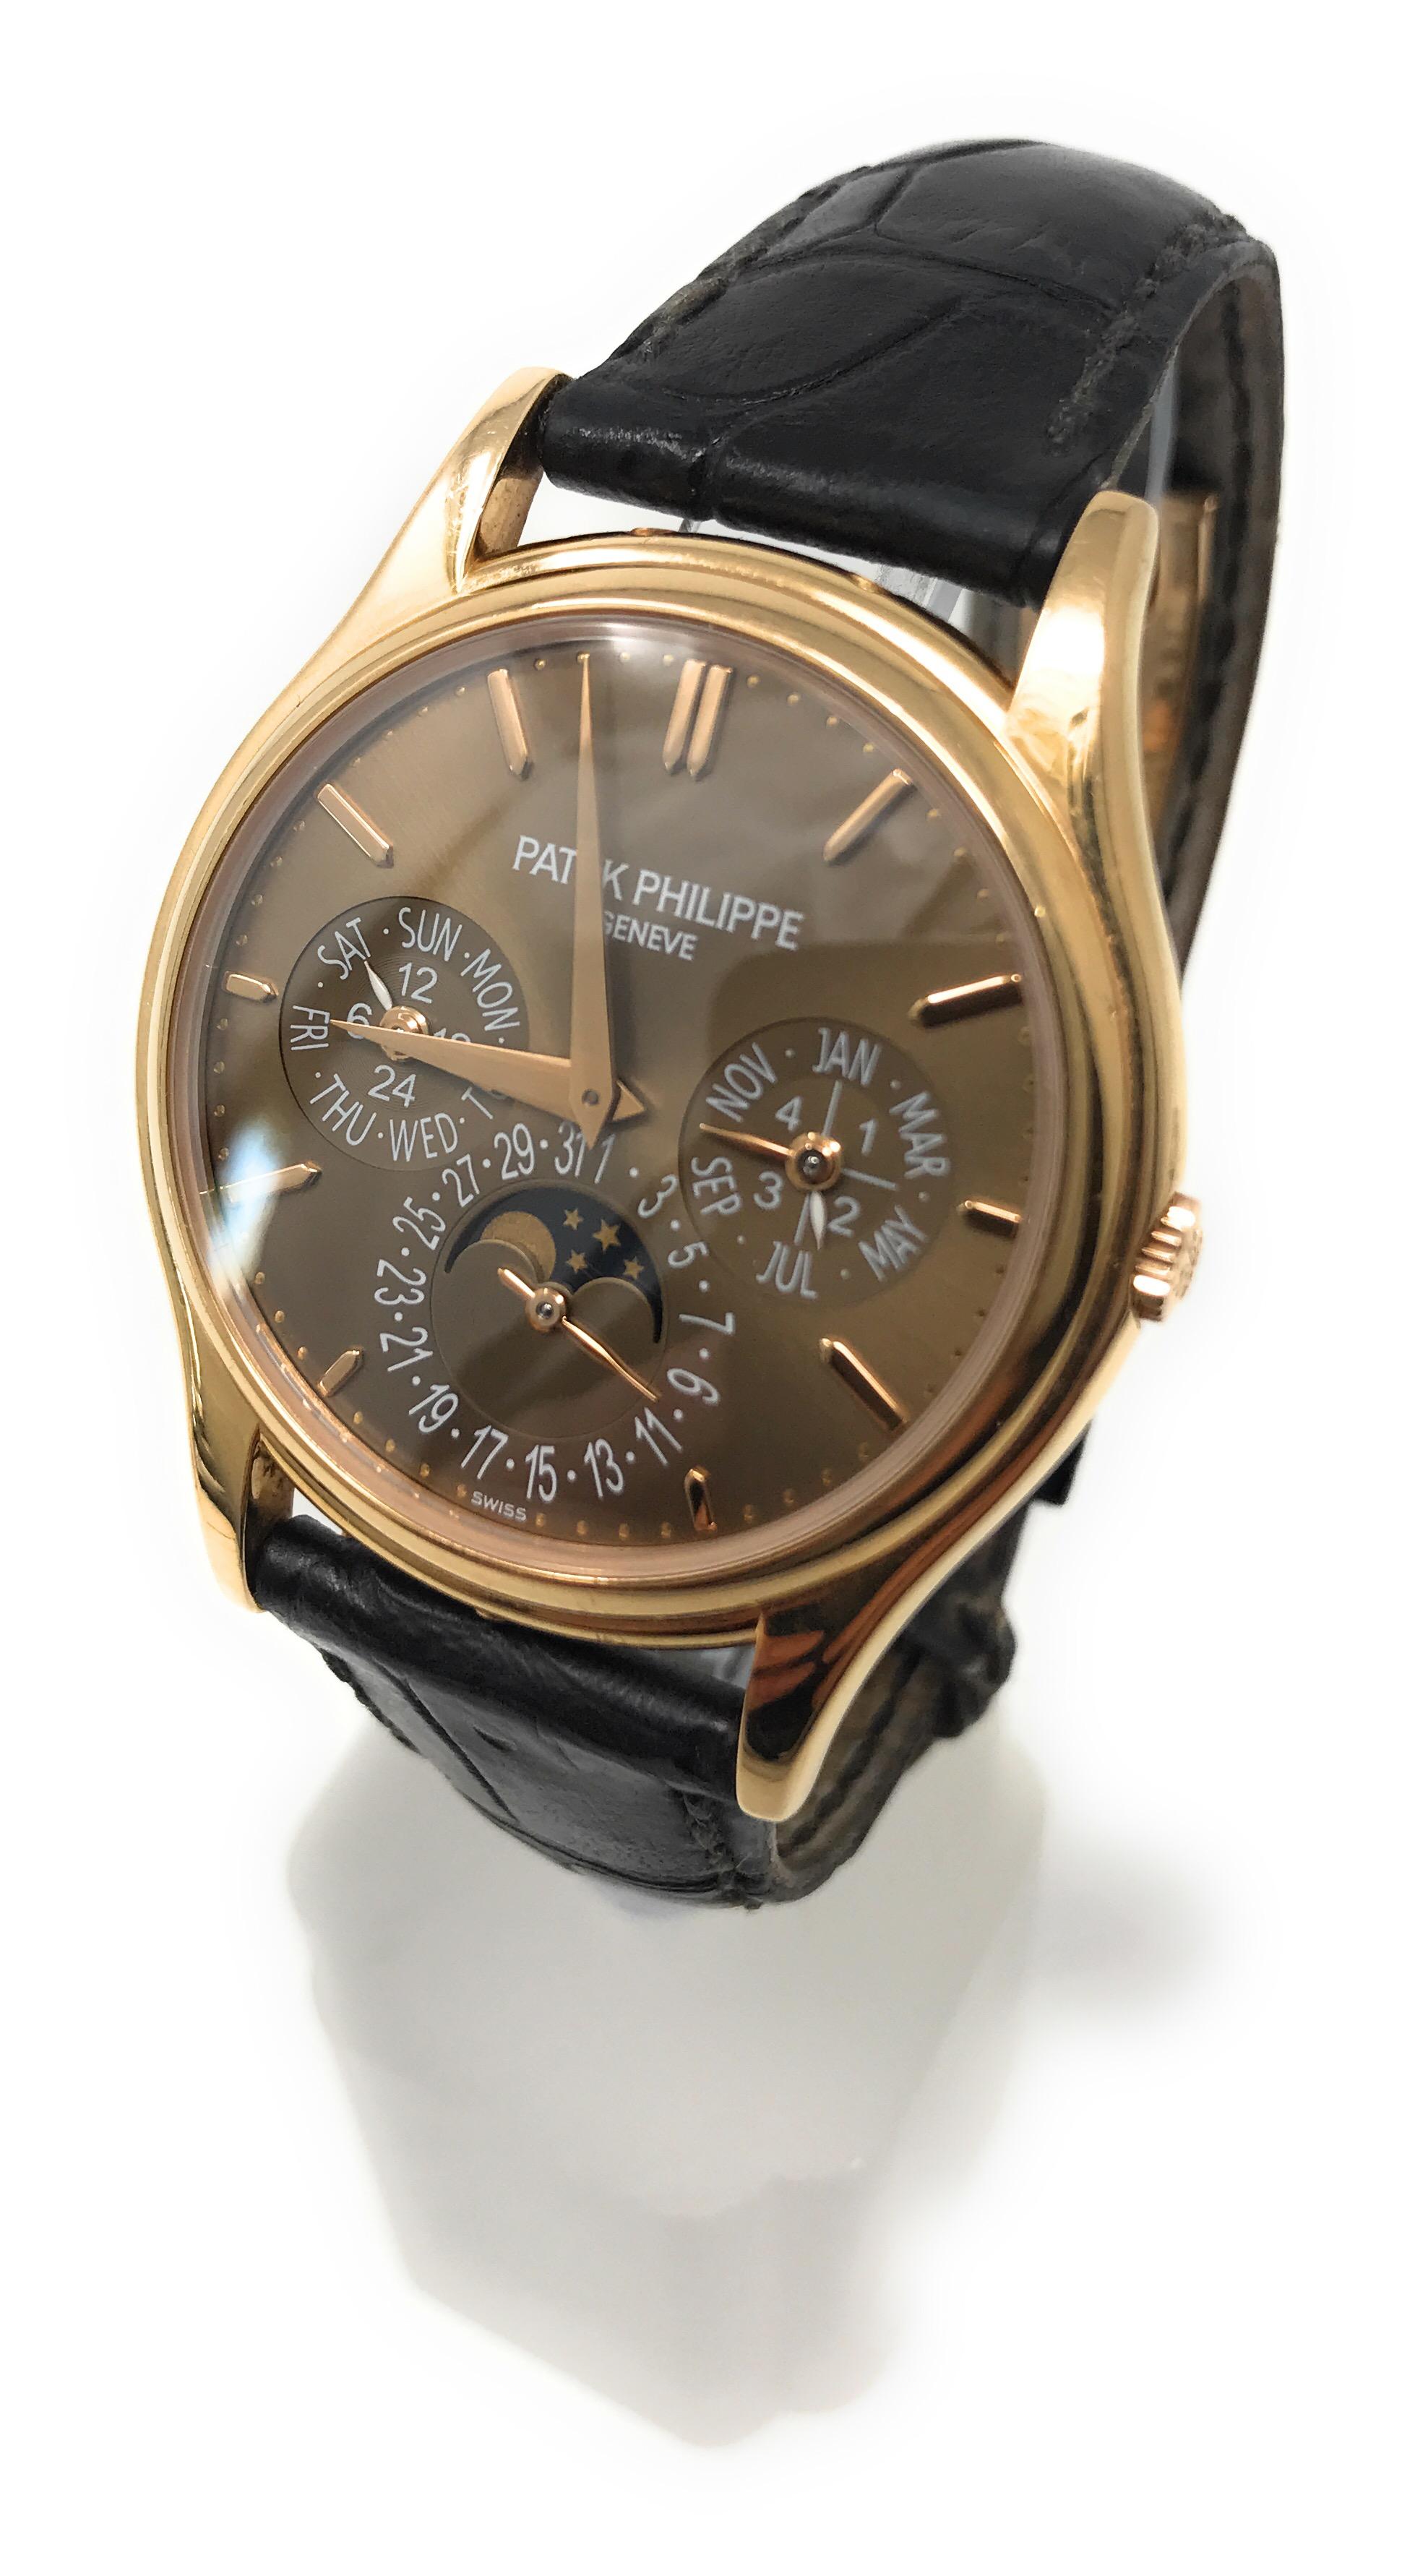 Patek Philippe Grand Complications Perpetual Calendar Men’s watch
Reference # 5140R-001
Movement: Mechanical, self winding
Case size: 37.3mm
Case shape: Round
Case material: 18 Karat Rose Gold 
Case back: Skeleton 
Dial color: Brown